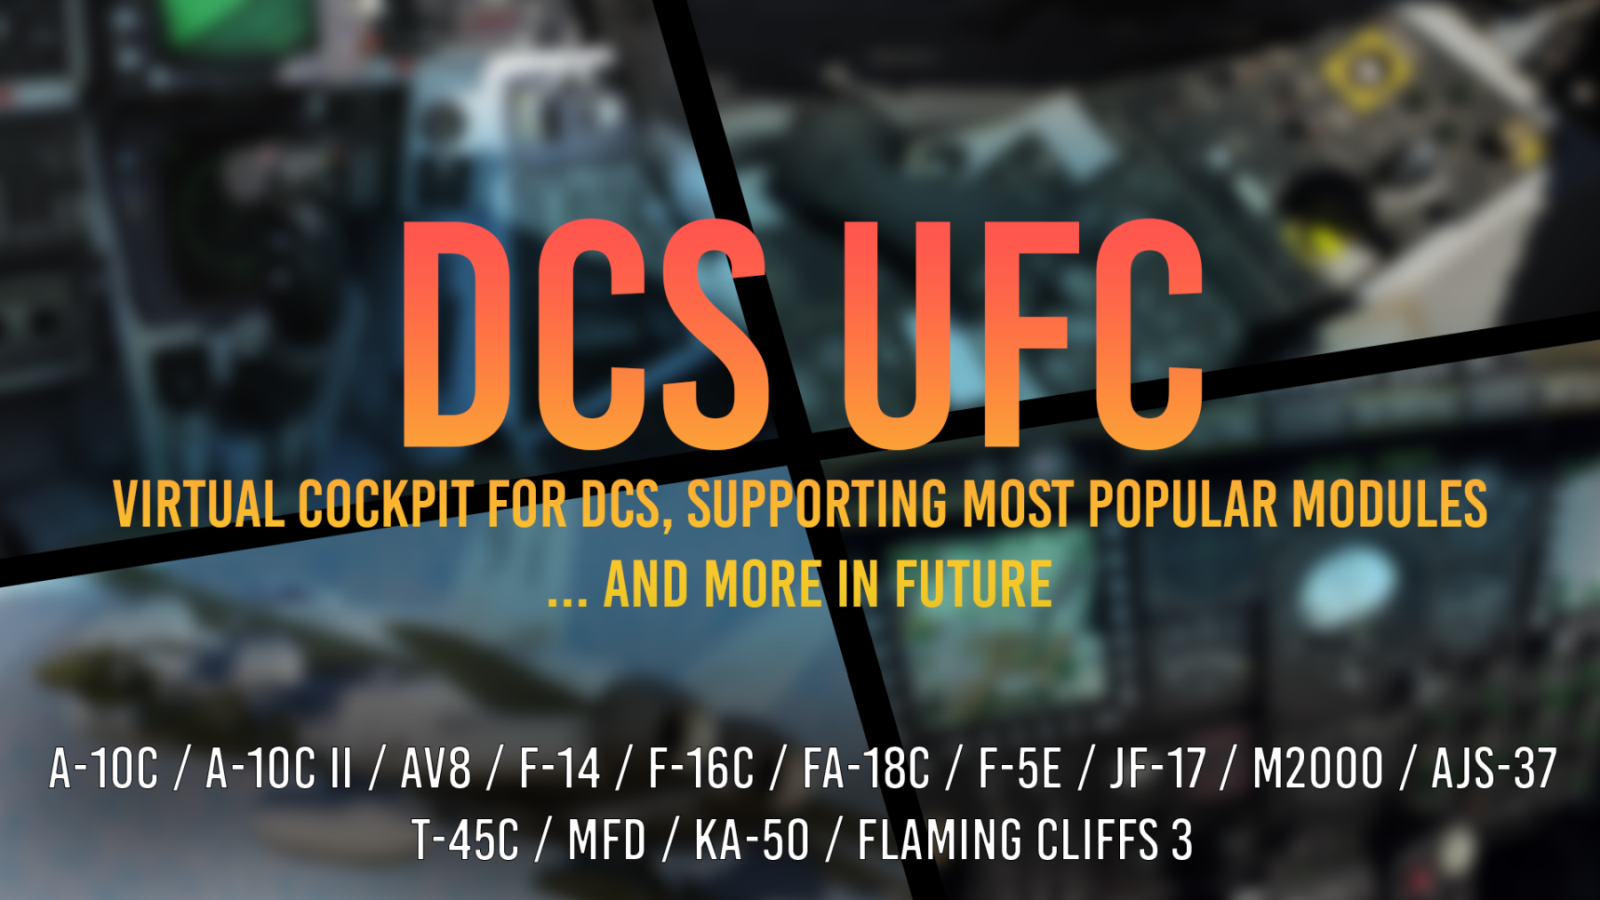 DCS UFC (Android app) 1.0.2024.0311